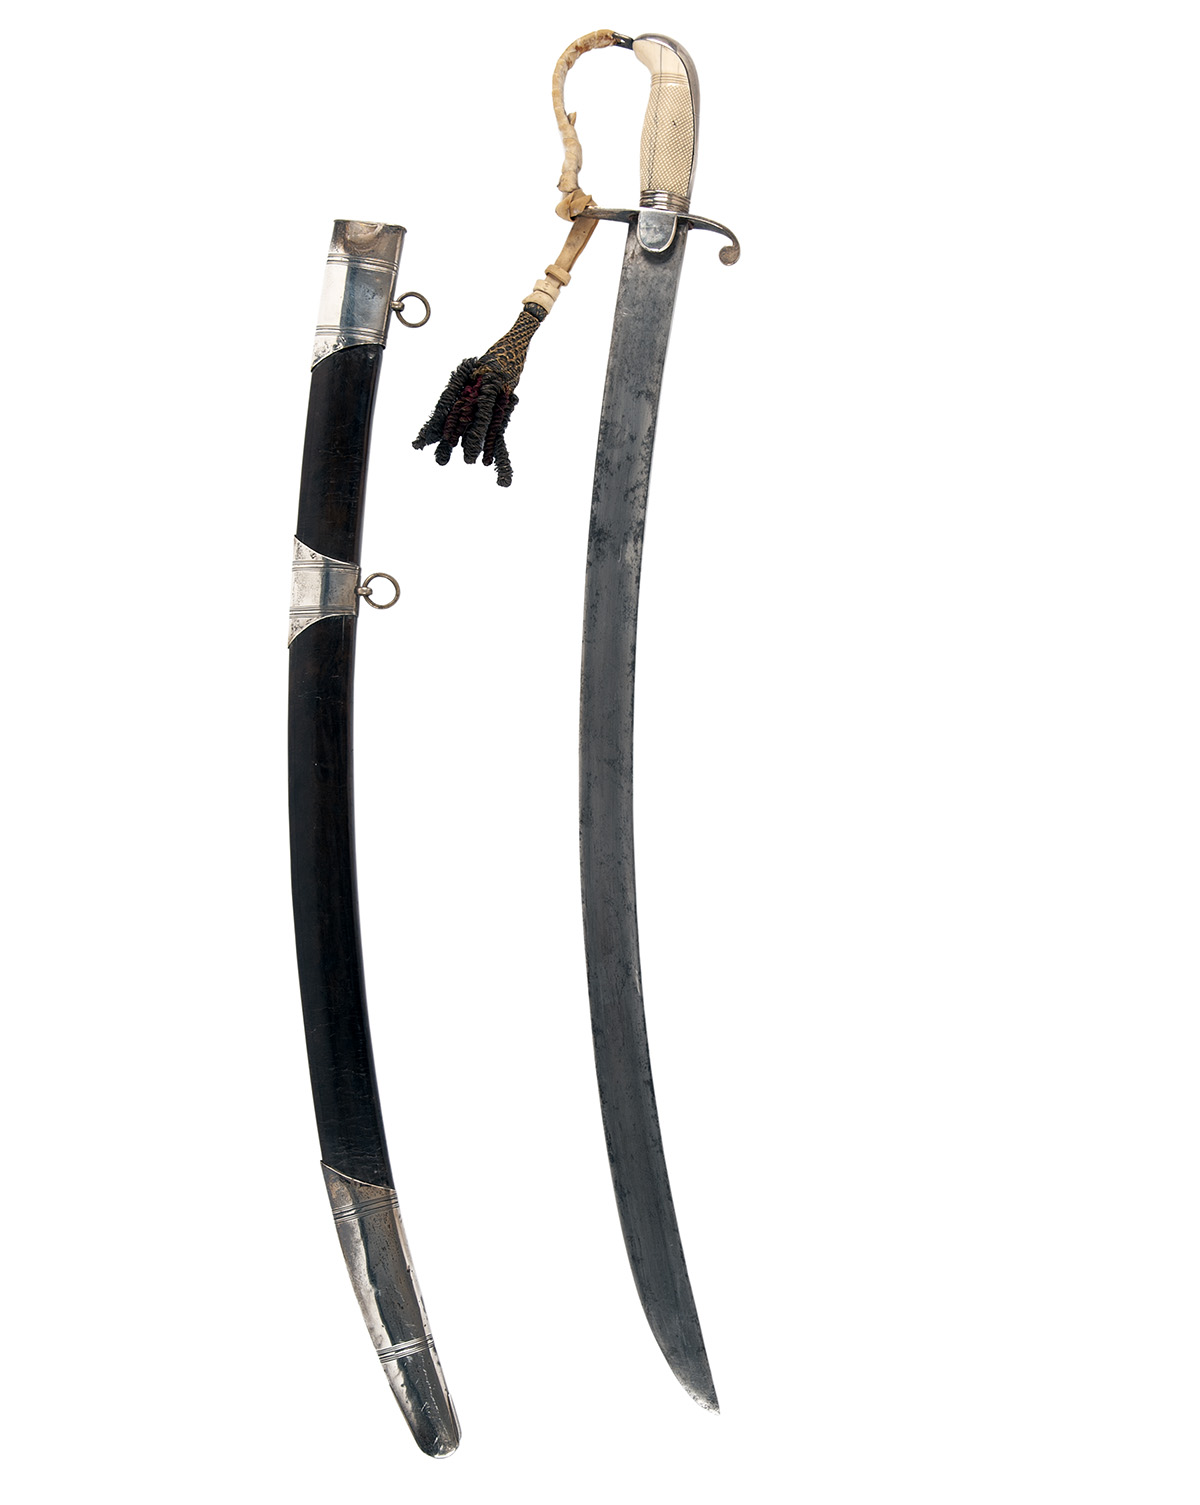 A BRITISH LIGHT CAVALRY OFFICER'S SILVER AND IVORY MOUNTED SWORD, UNSIGNED, circa 1800 but not - Image 3 of 3